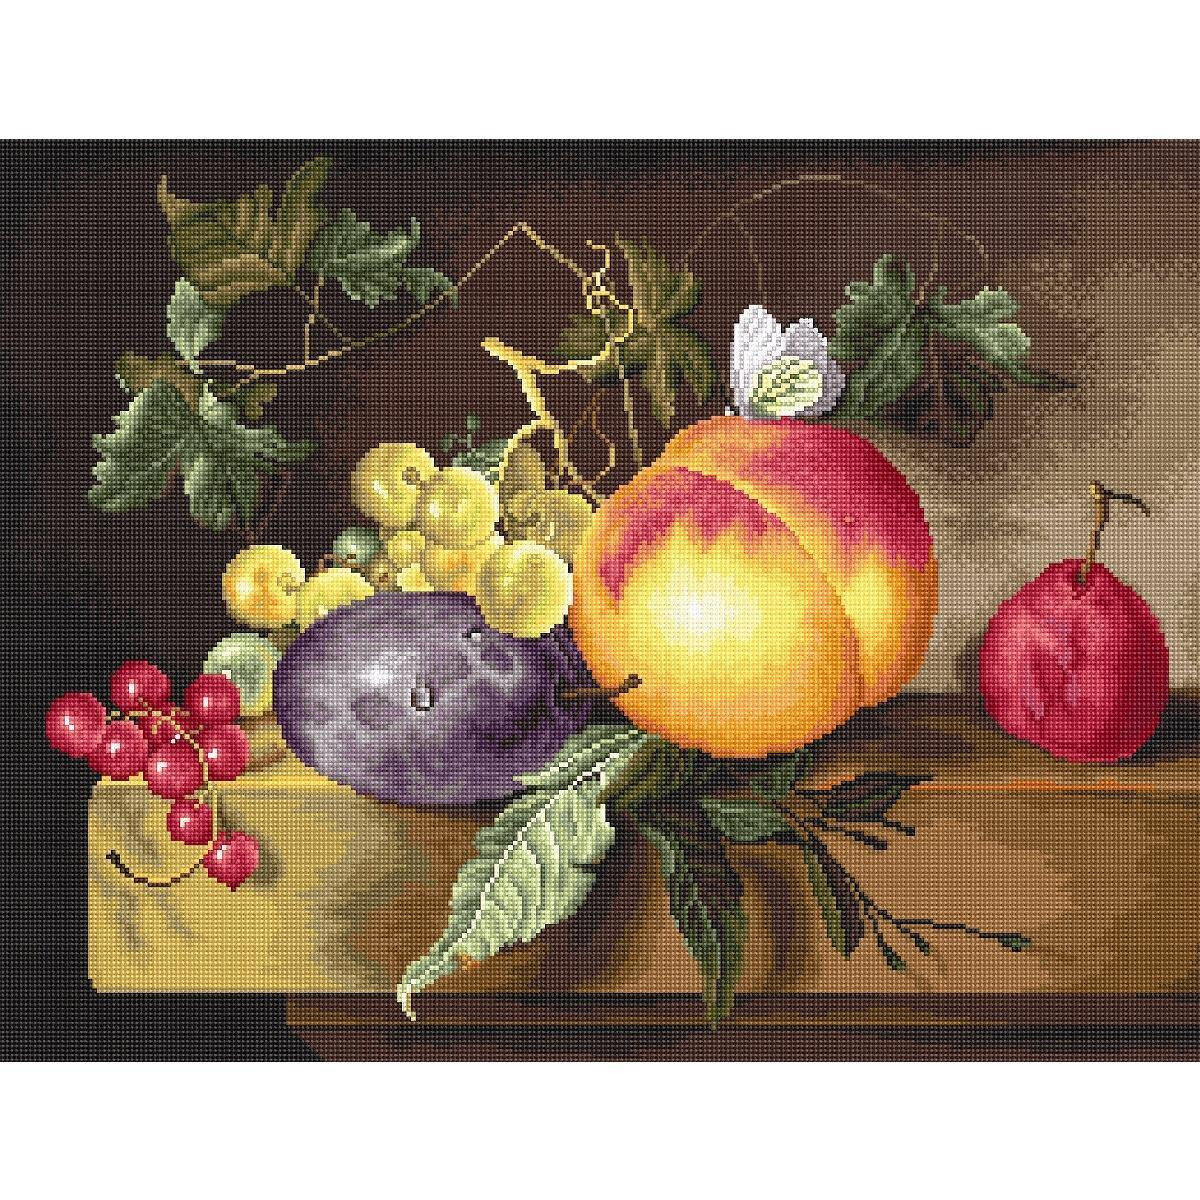 A still life shows a wooden board with various fruits,...